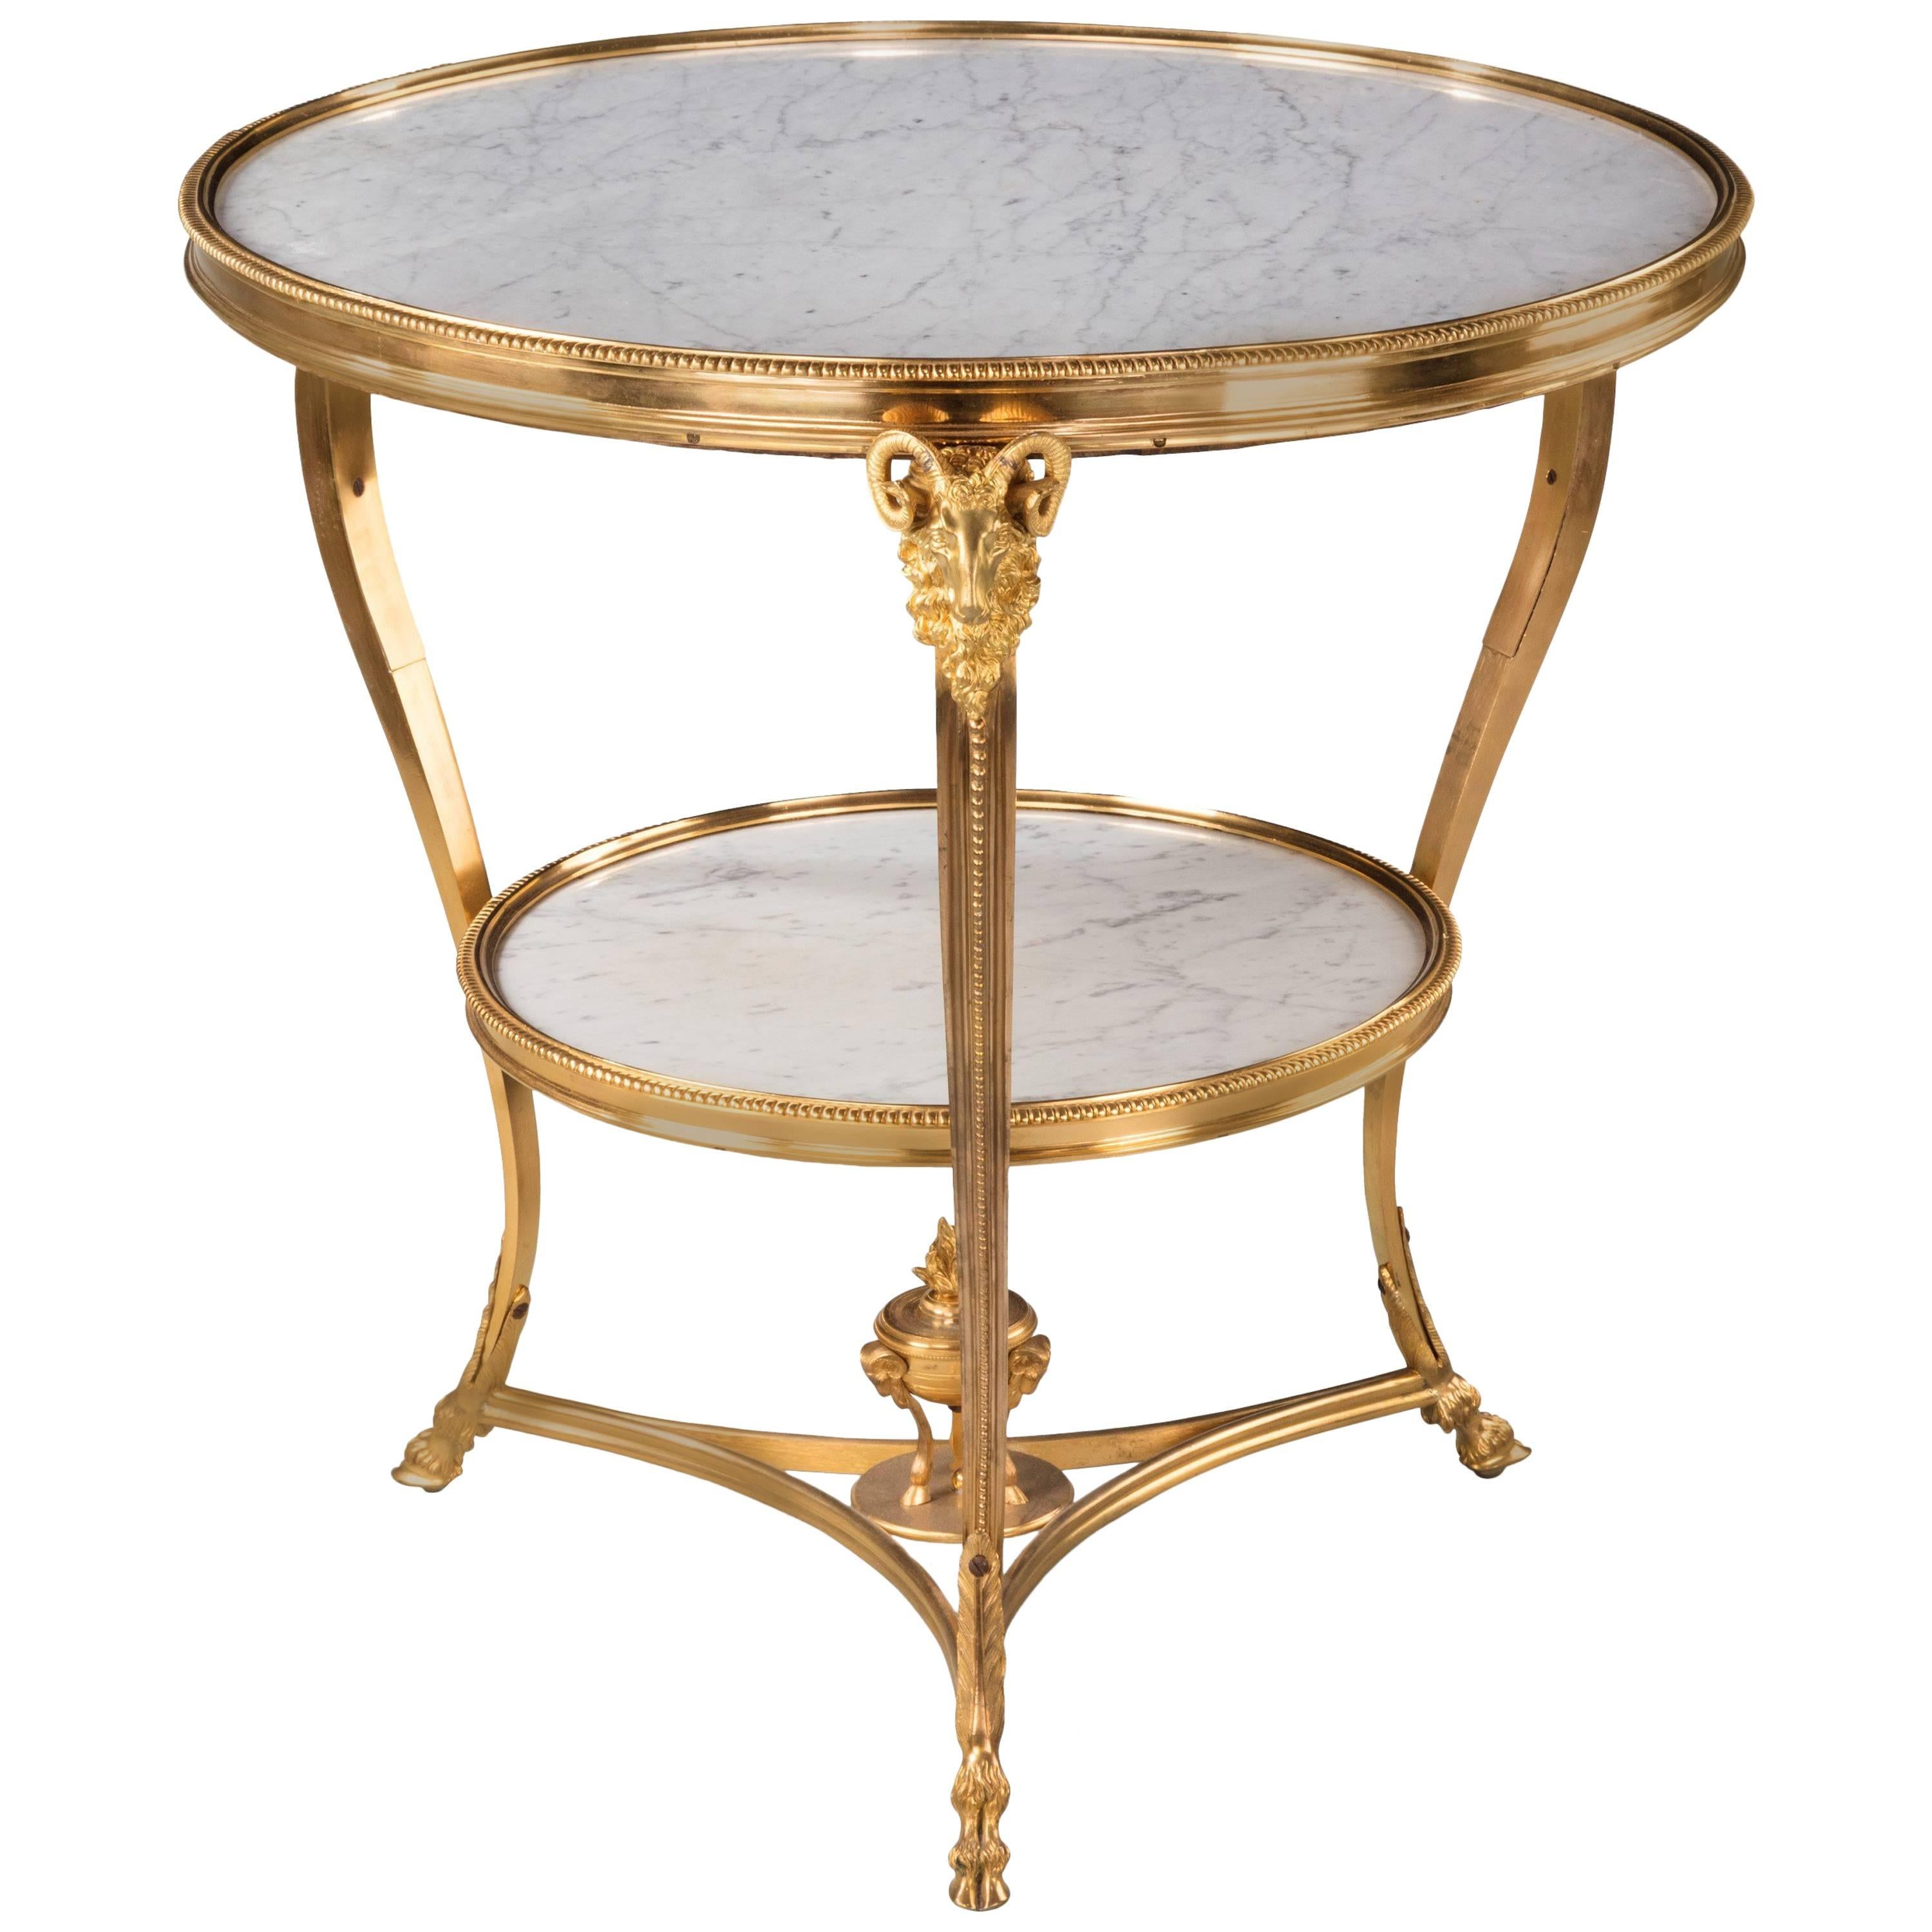 Late 19th Century French Two-Tier Gueridon